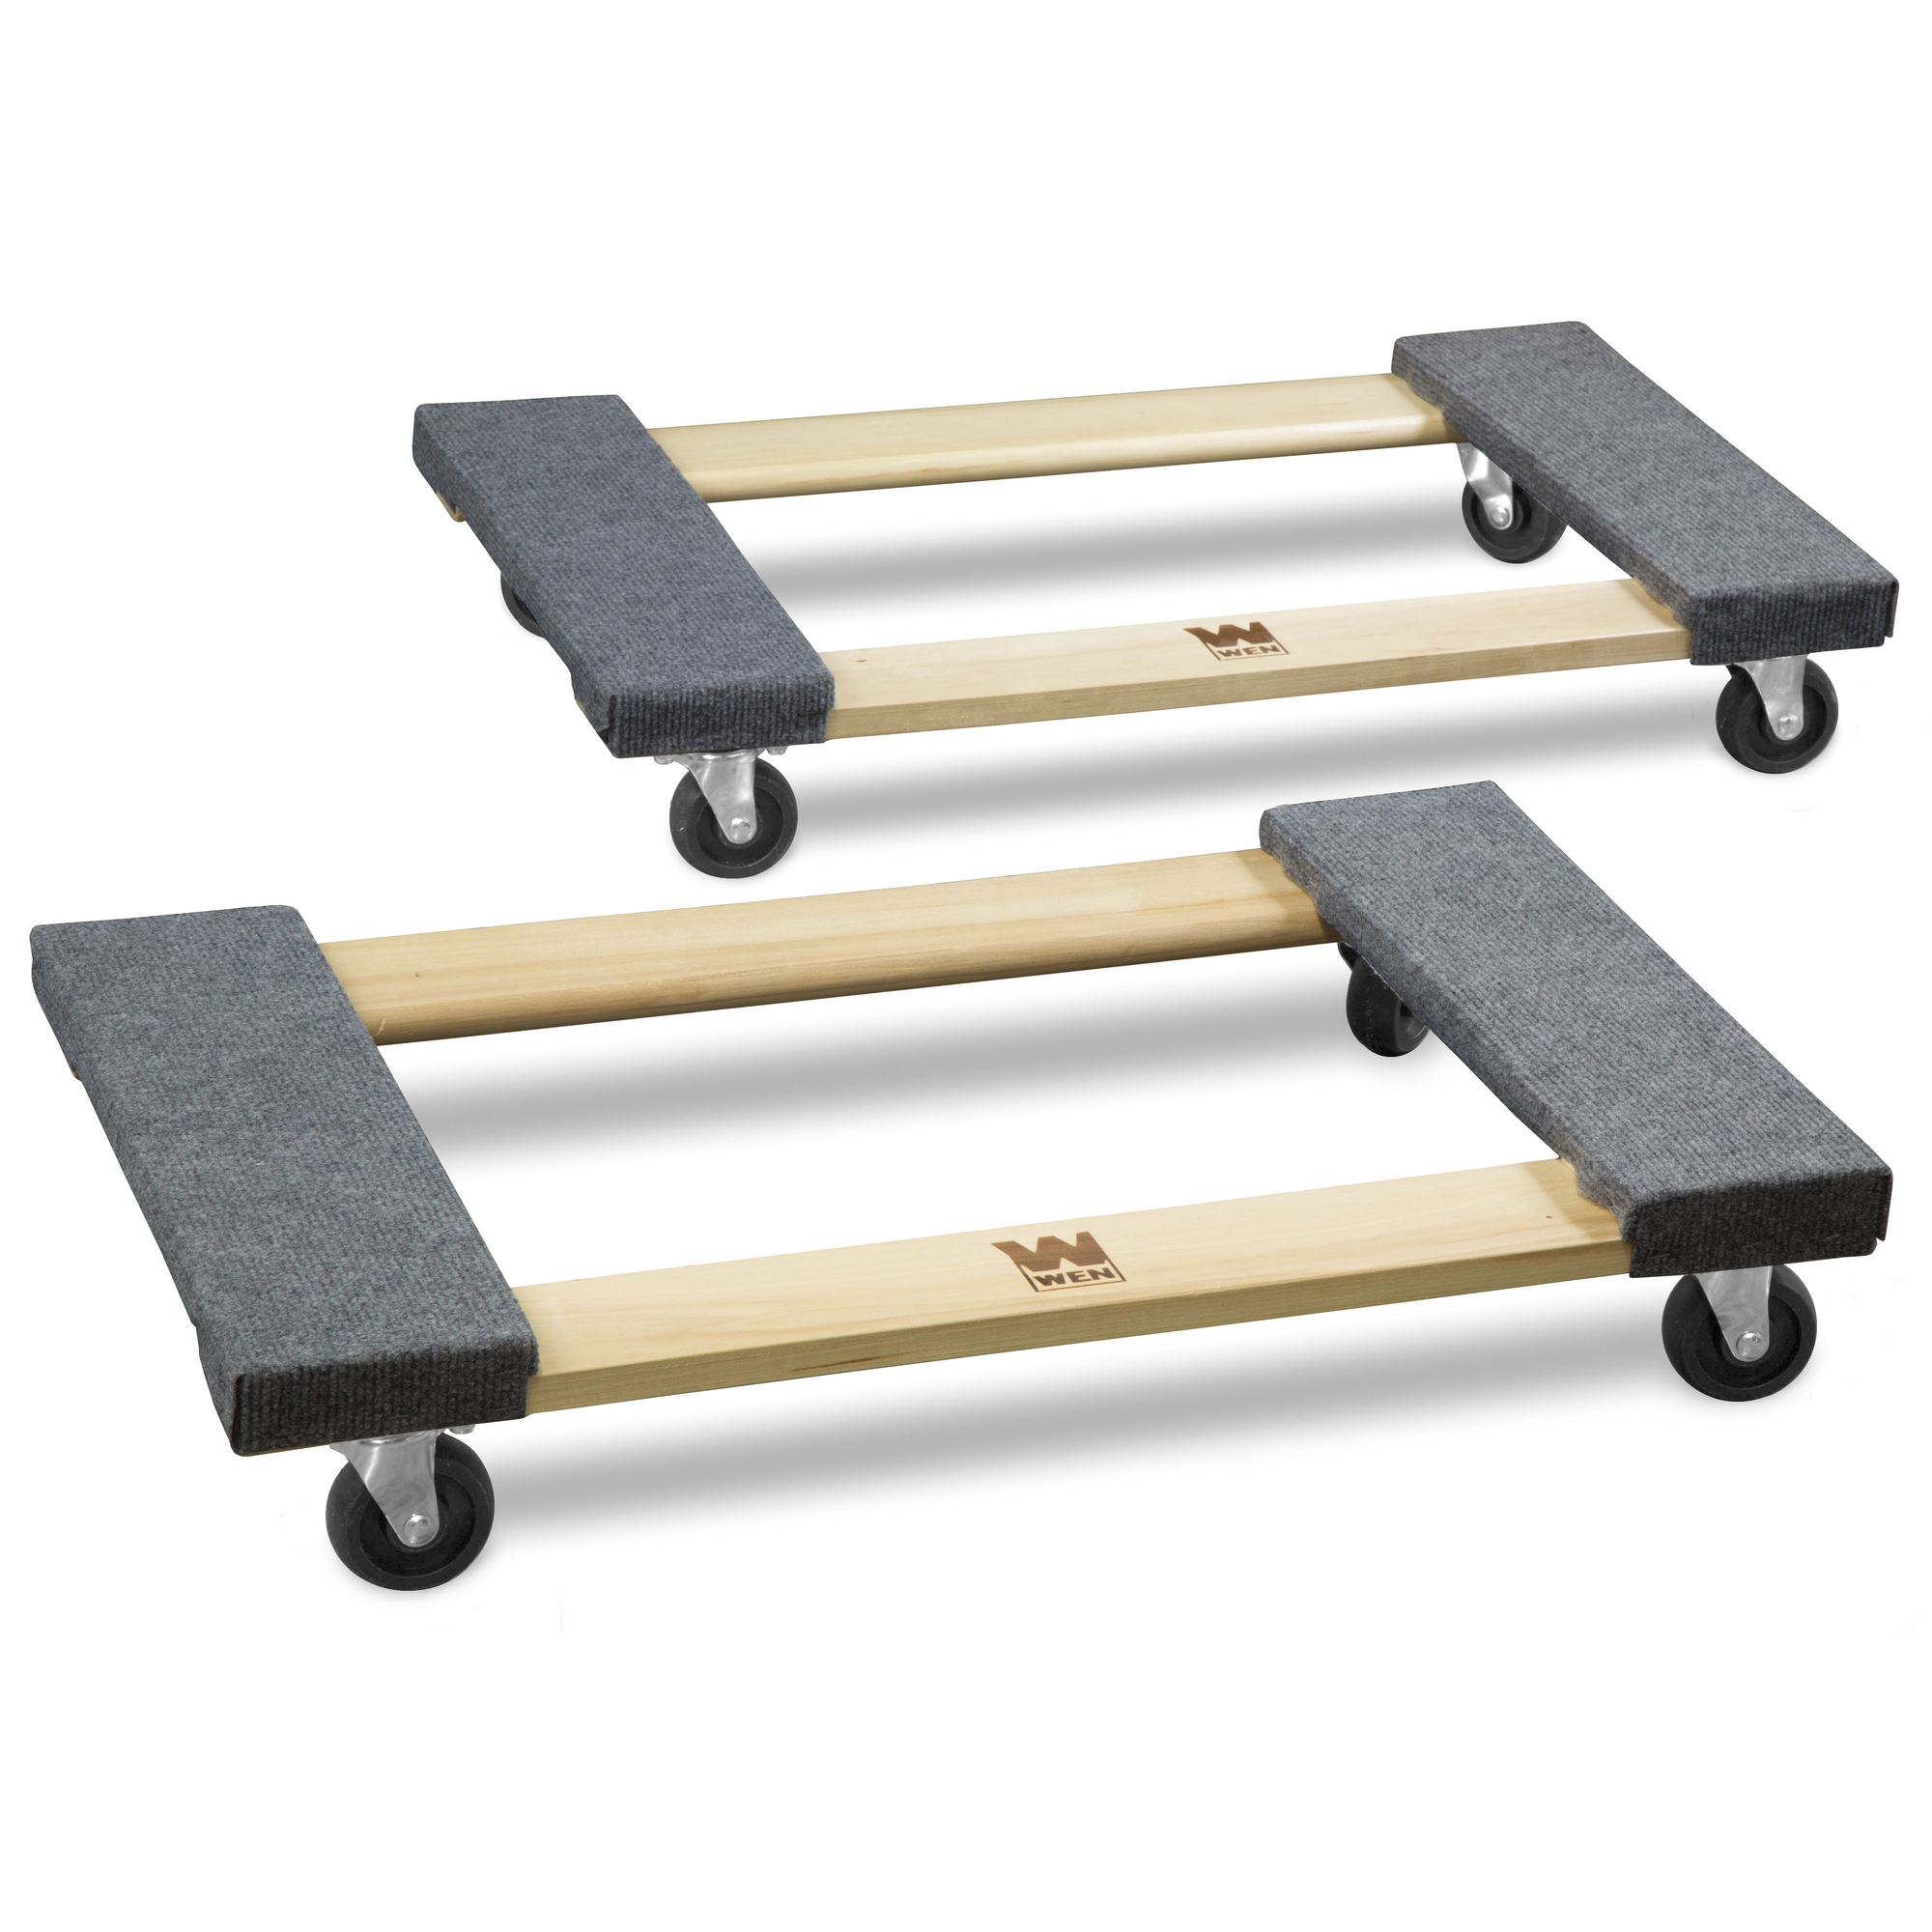 WEN, 1320-Pound Capacity 18Inchx30Inch Movers Dolly, 2-Pack, Capacity 1320 lb, Frame Material Hardwood, Single, Pair, or Set Pair, Model 721830